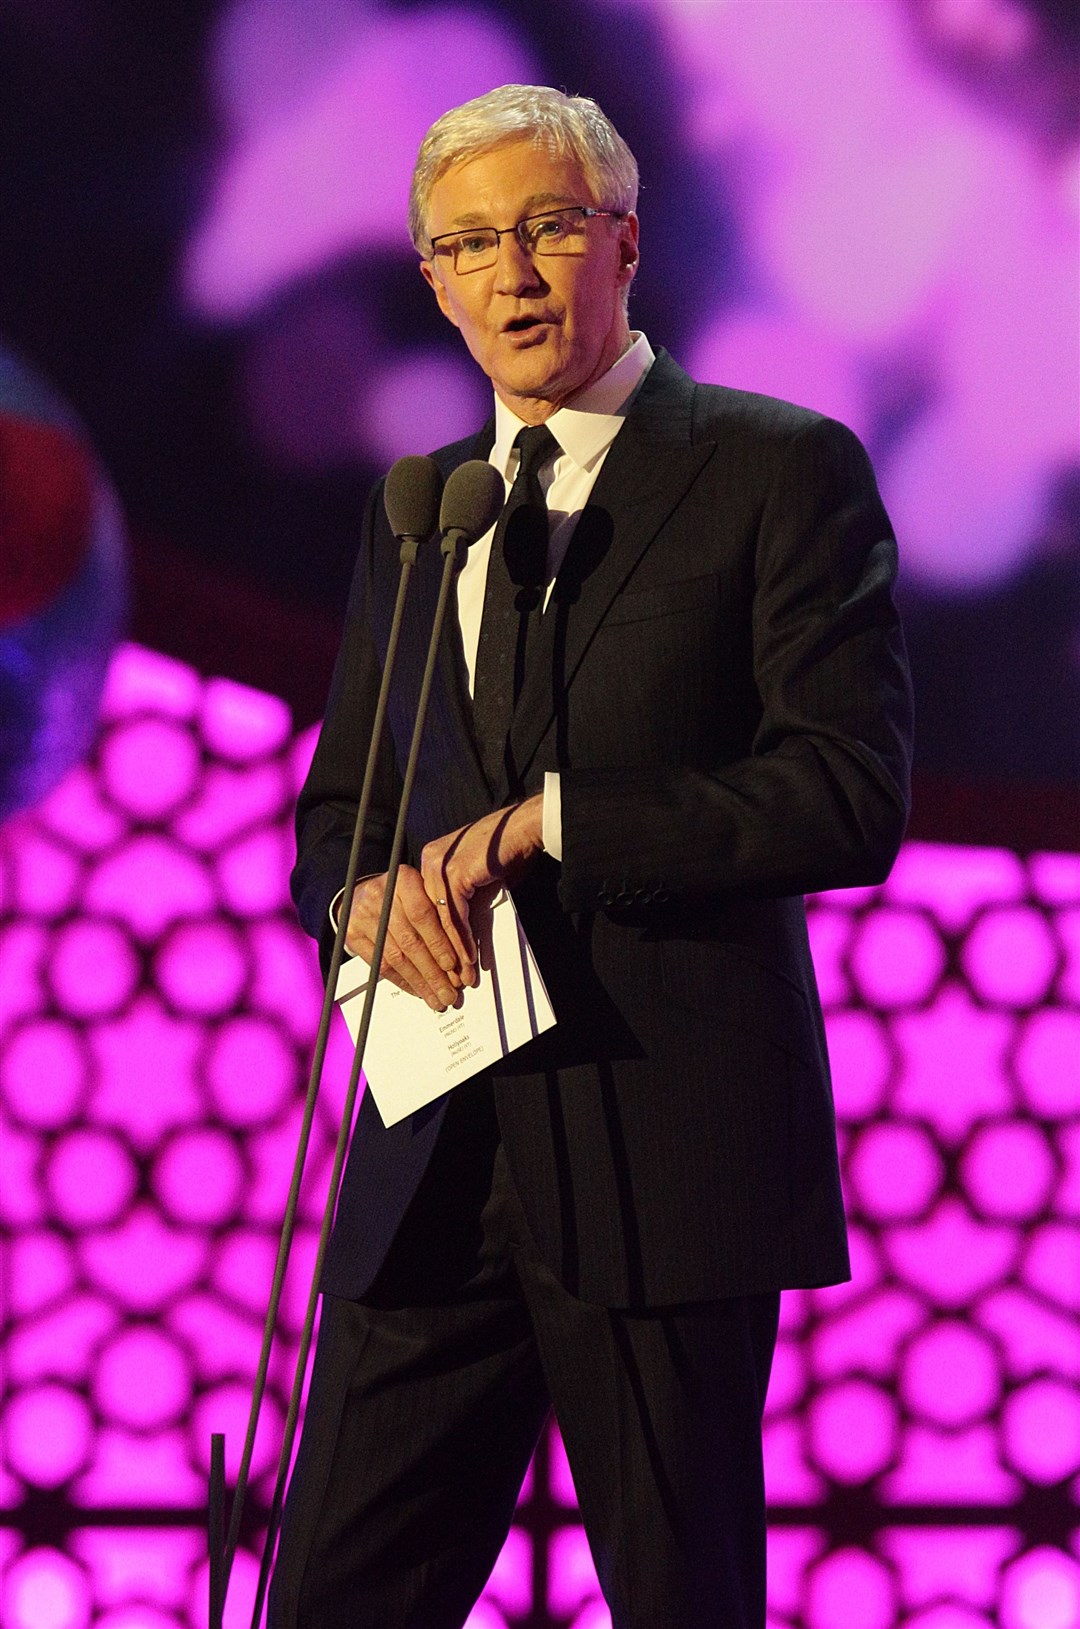 Paul O’Grady on stage during the 2012 NTA Awards (PA)